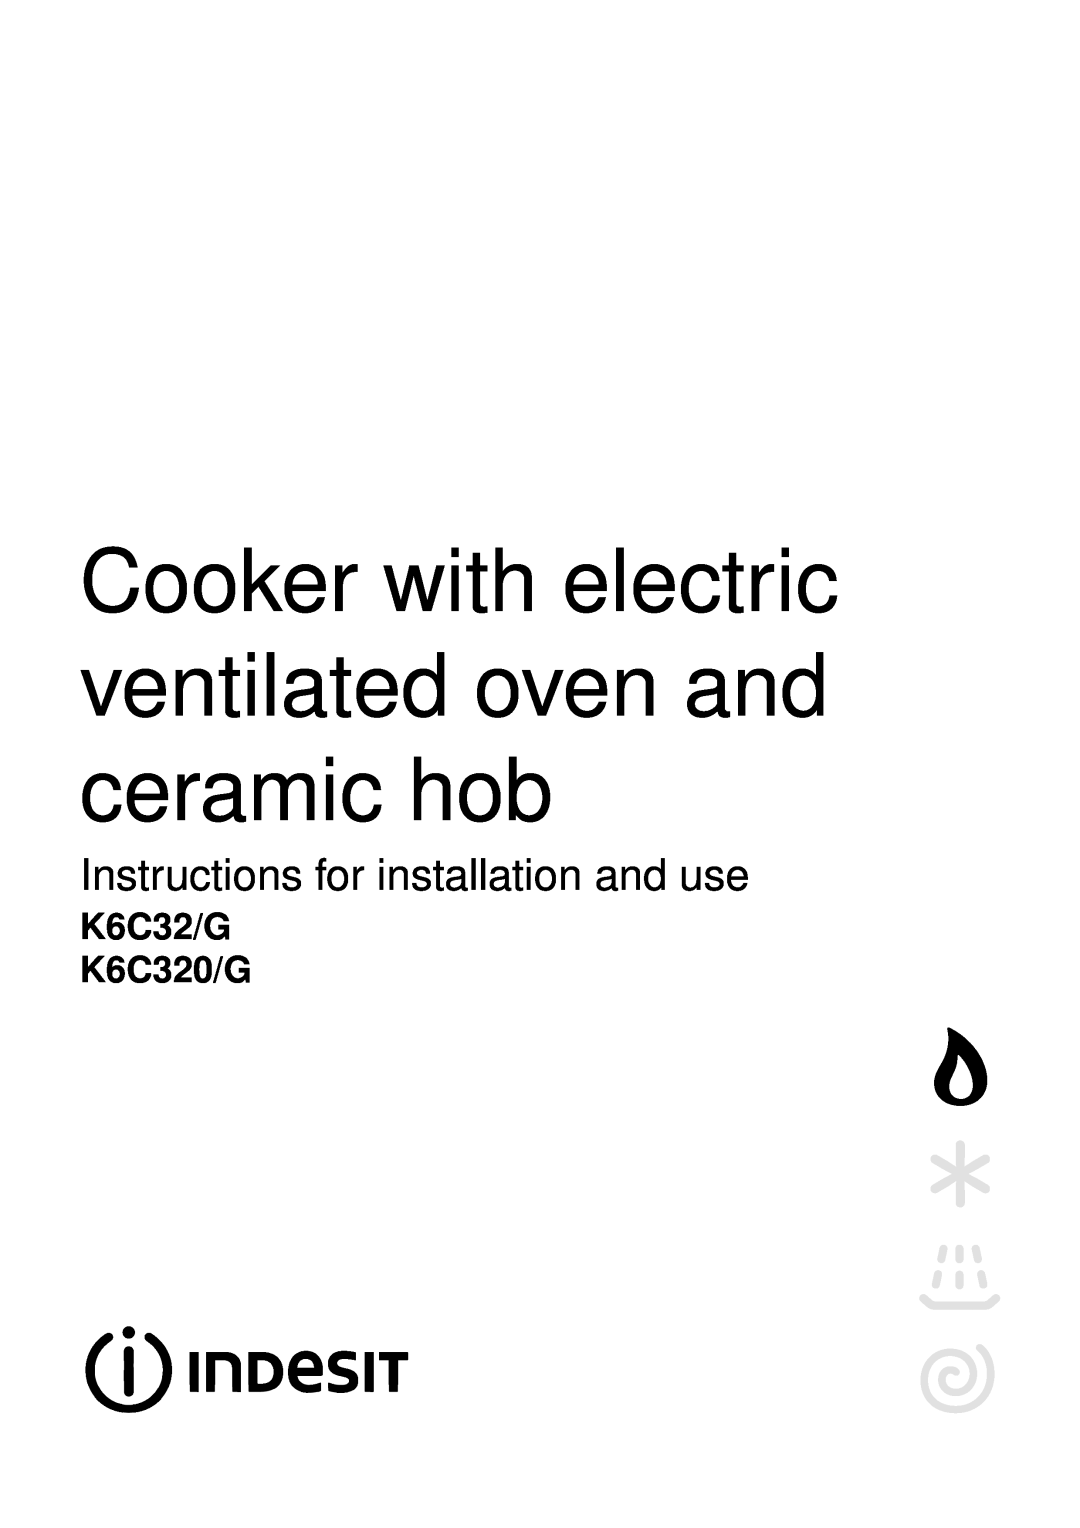 Indesit manual Instructions for installation and use, K6C32/G K6C320/G 